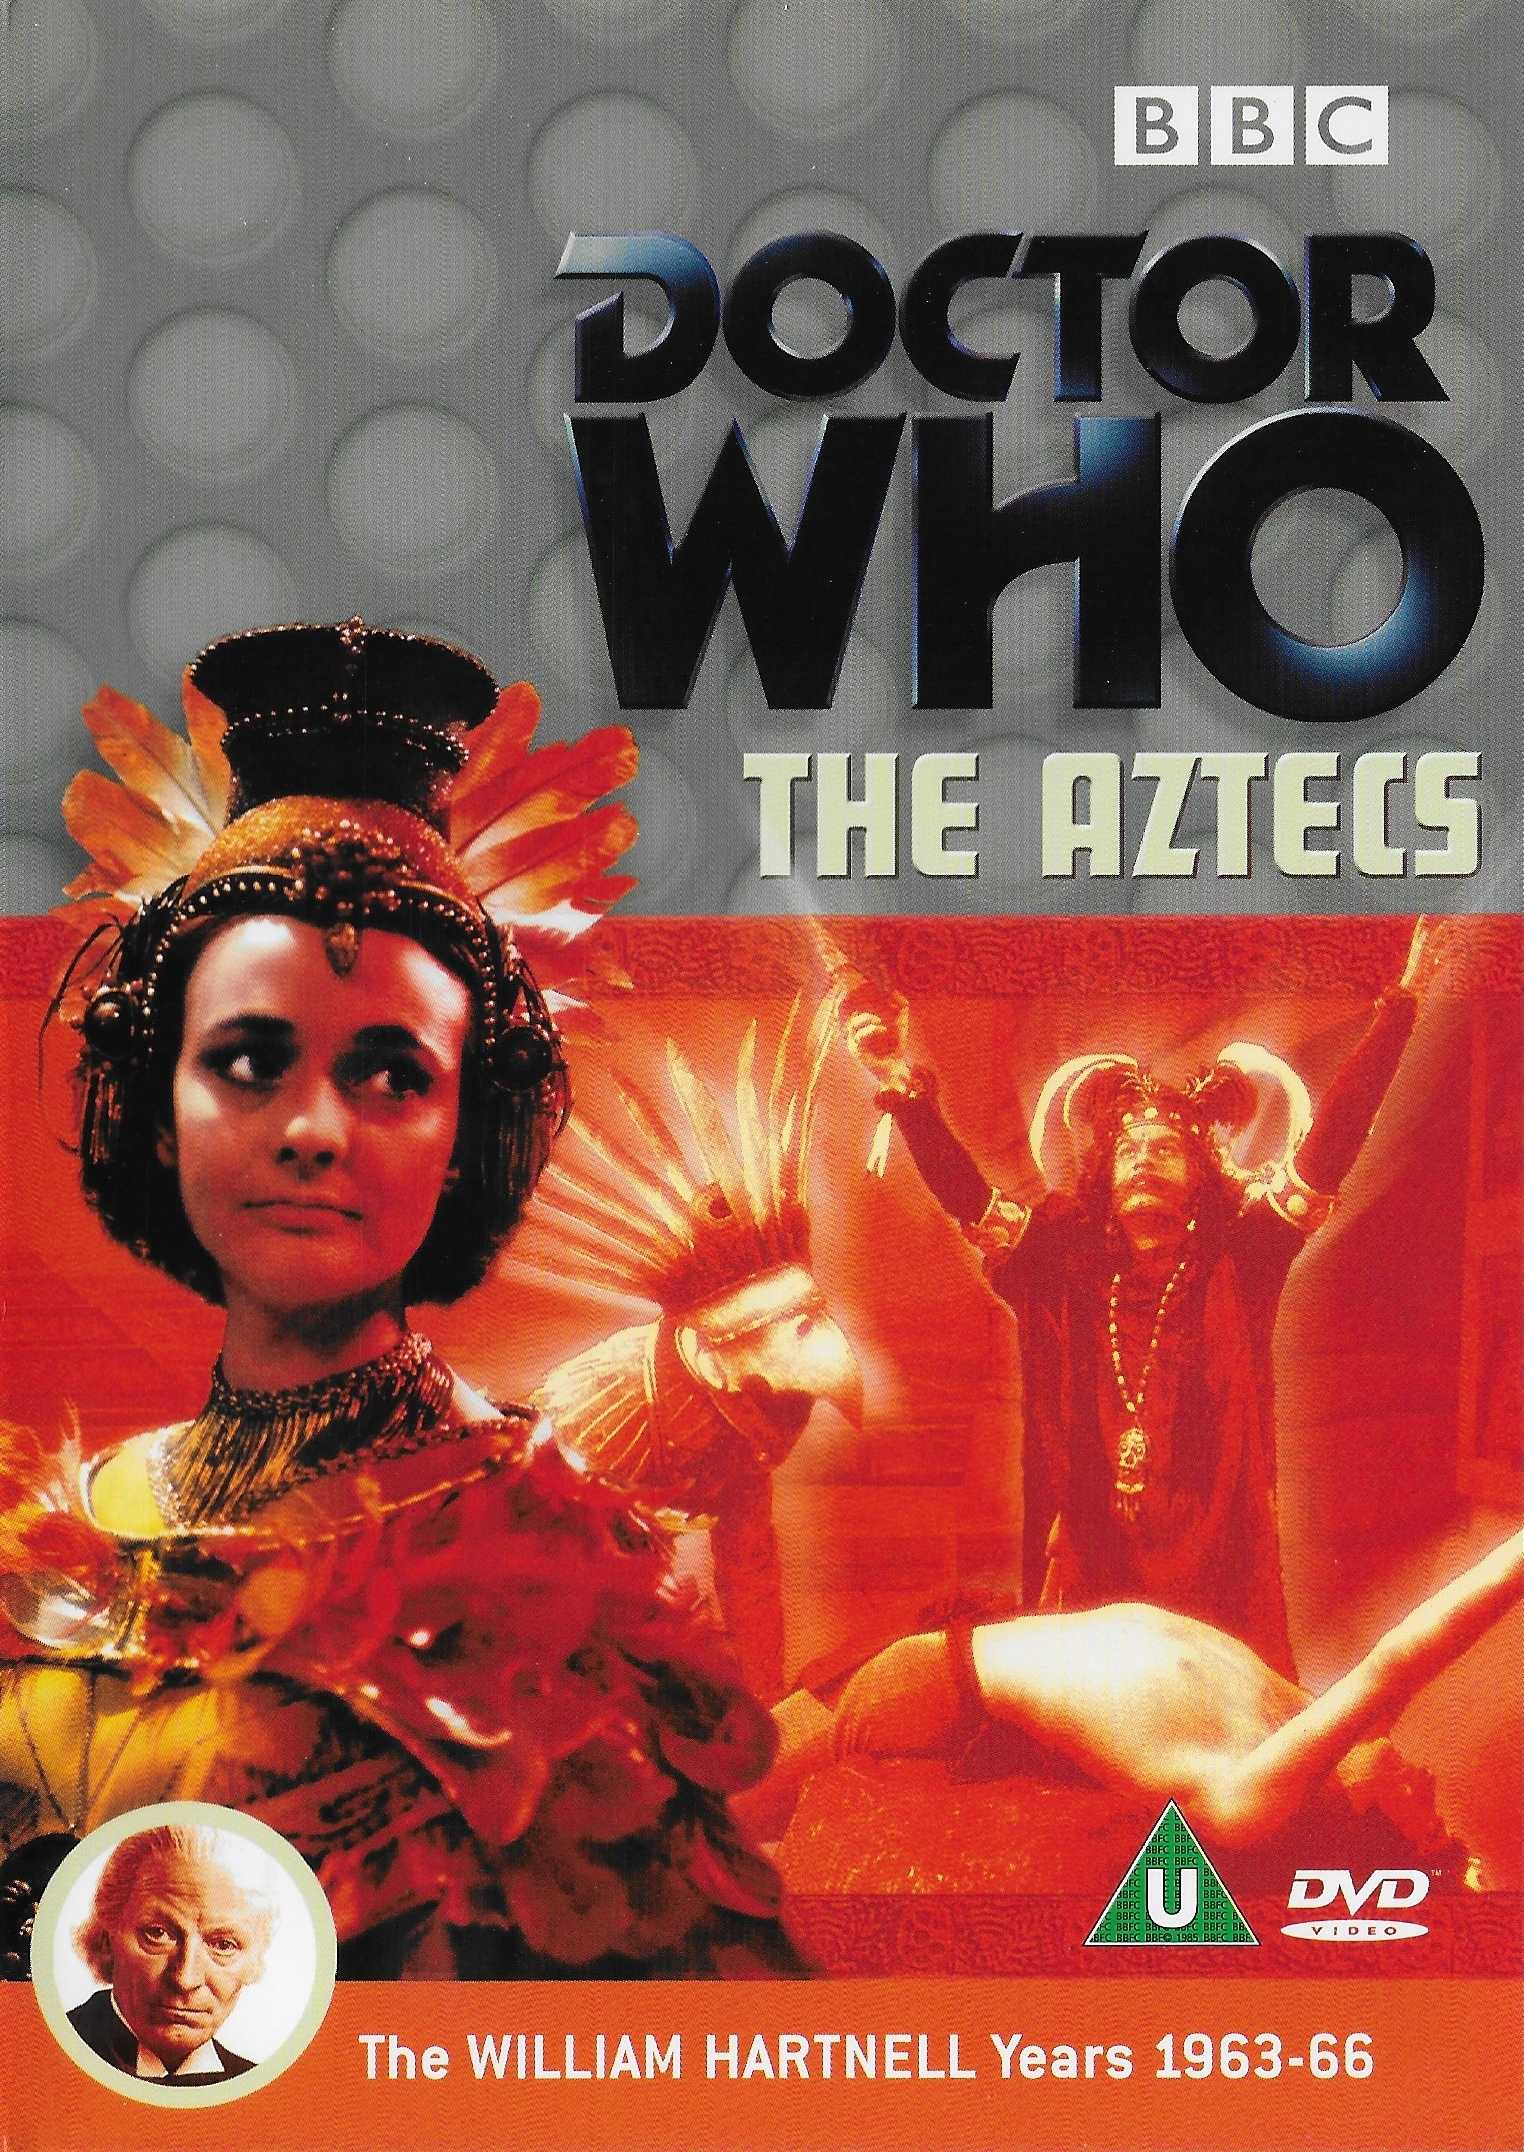 Picture of BBCDVD 1099 Doctor Who - The Aztecs by artist John Lucarotti from the BBC records and Tapes library